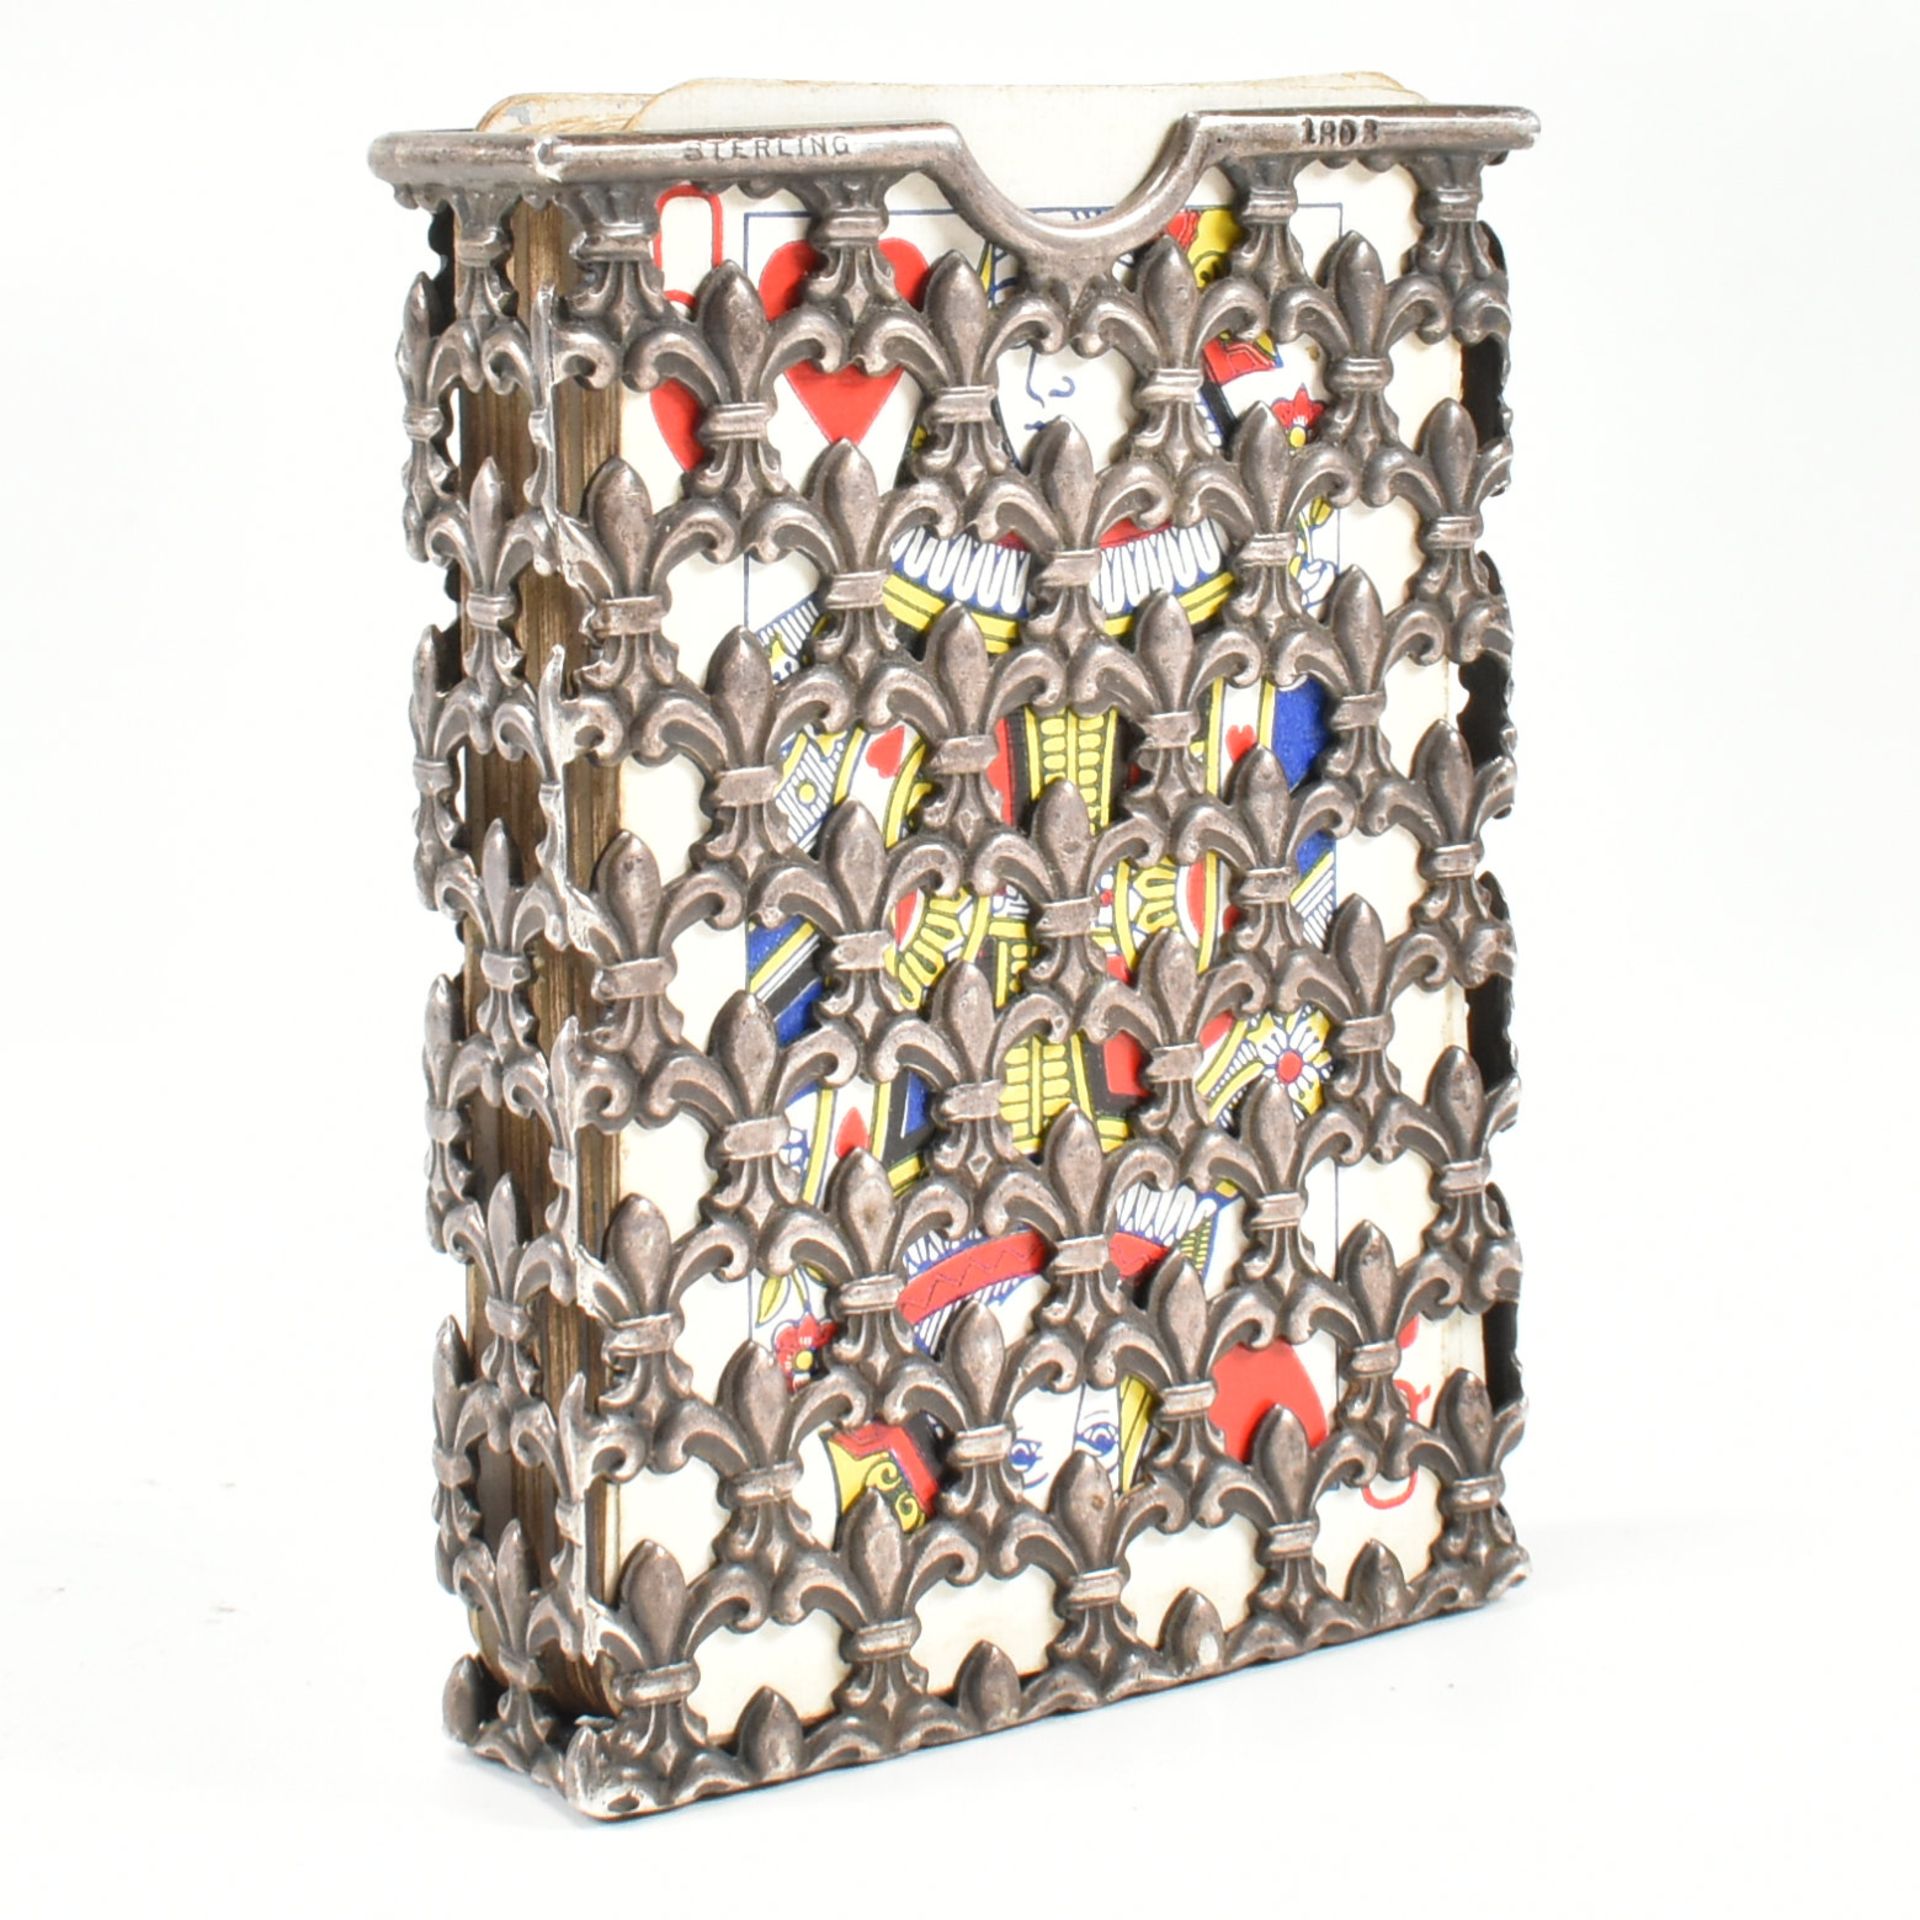 STERLING SILVER PLAYING CARD CASE